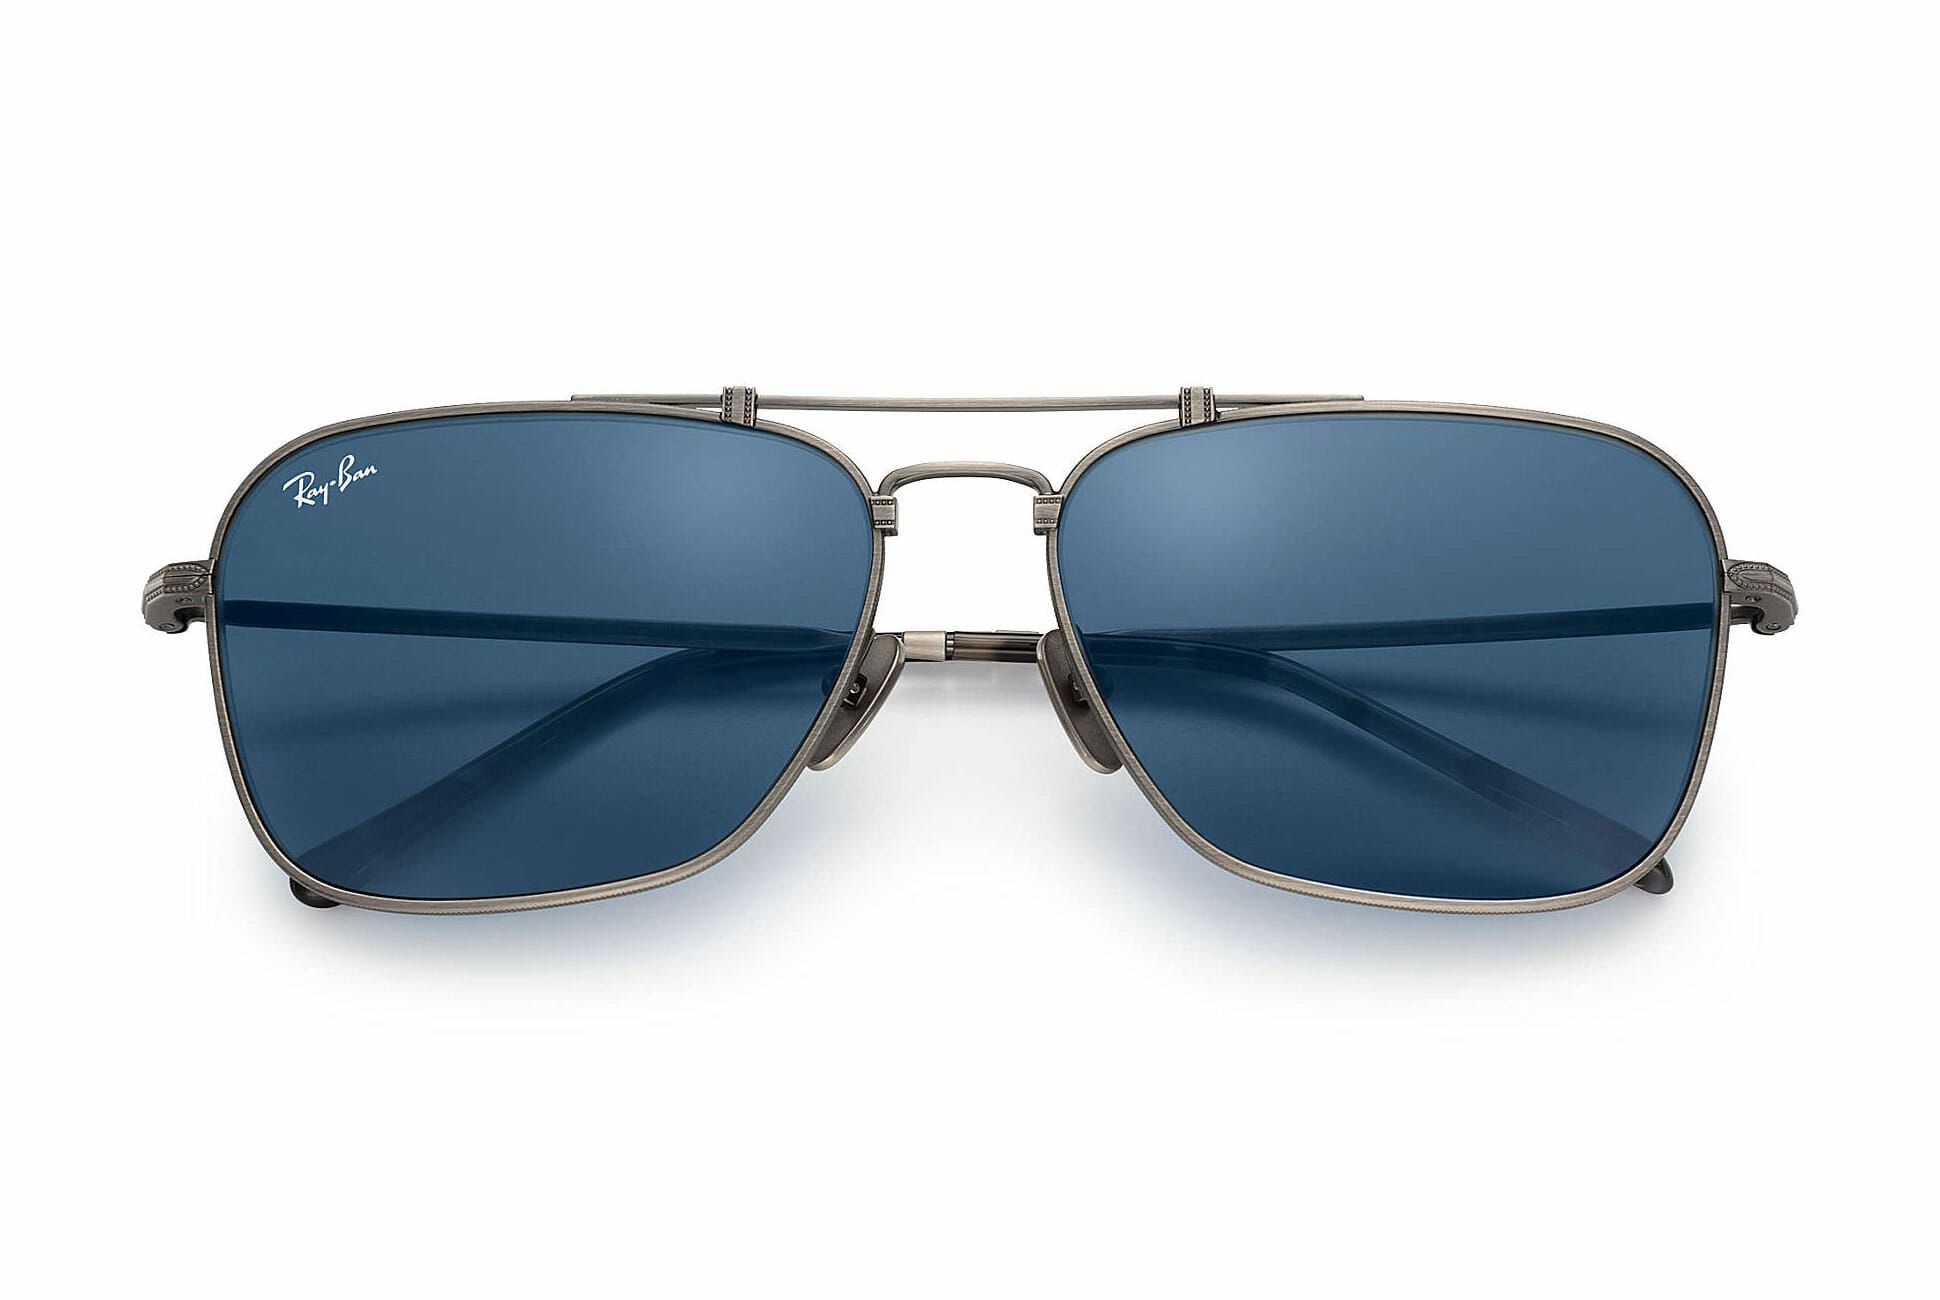 how much are ray ban sunglasses worth